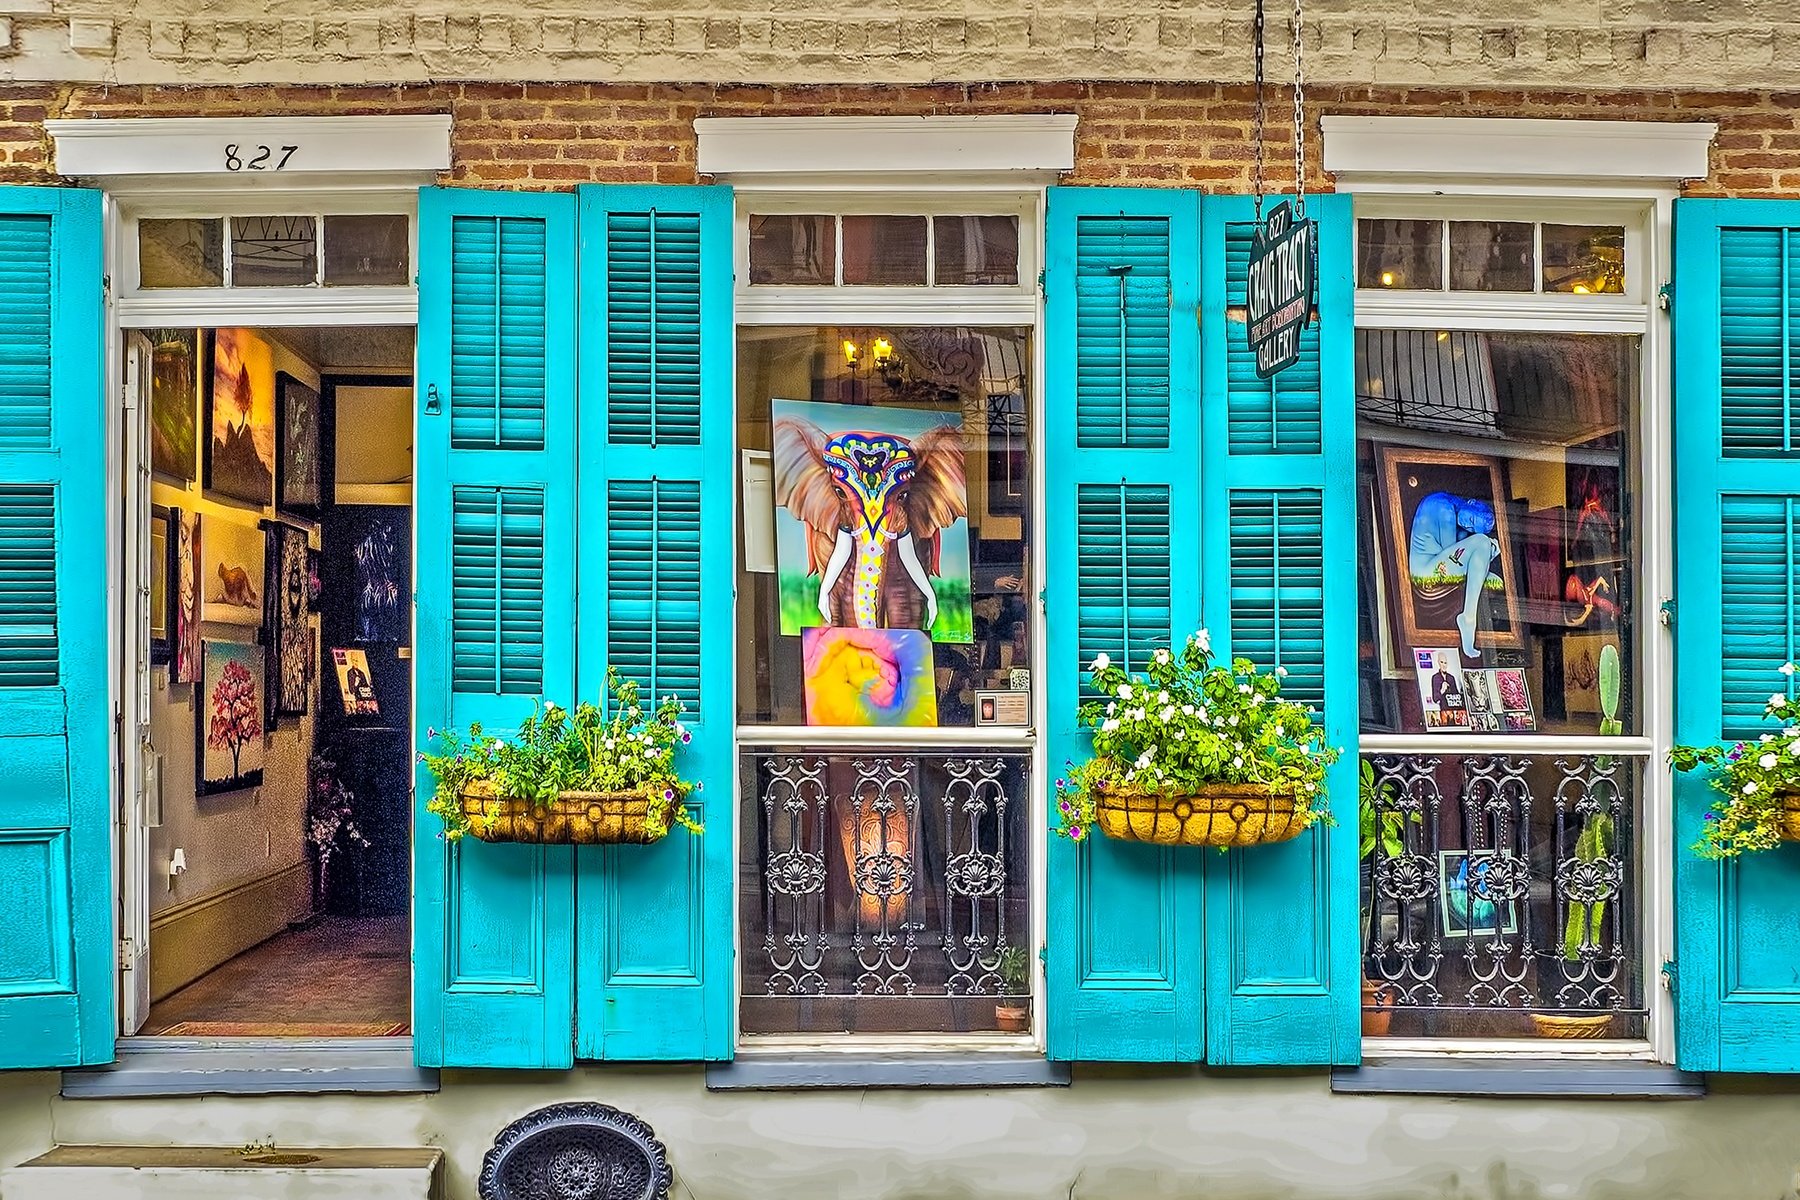 827 ROYAL STREET - Just one of the many interesting and fun store fronts in the French Quarter district of New Orleans. This happens to be the Craig Tracy Gallery.